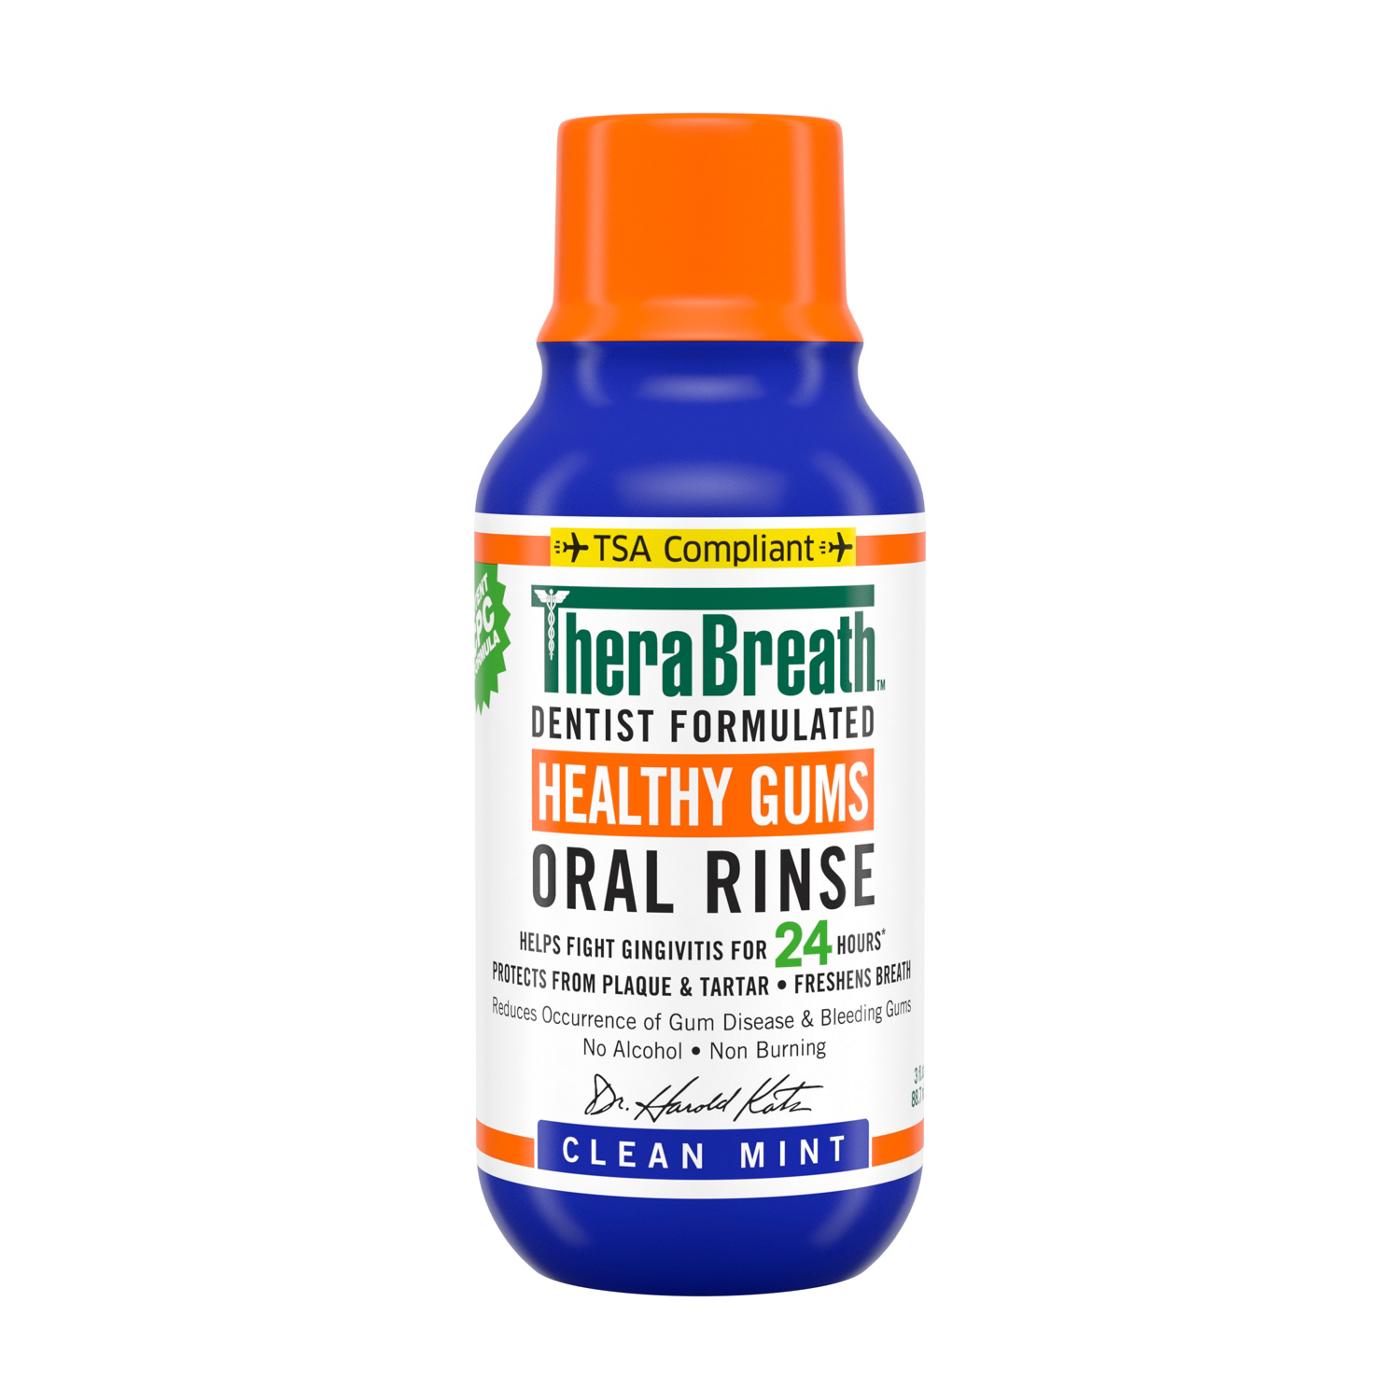 TheraBreath Healthy Gums Oral Rinse - Clean Mint; image 1 of 2